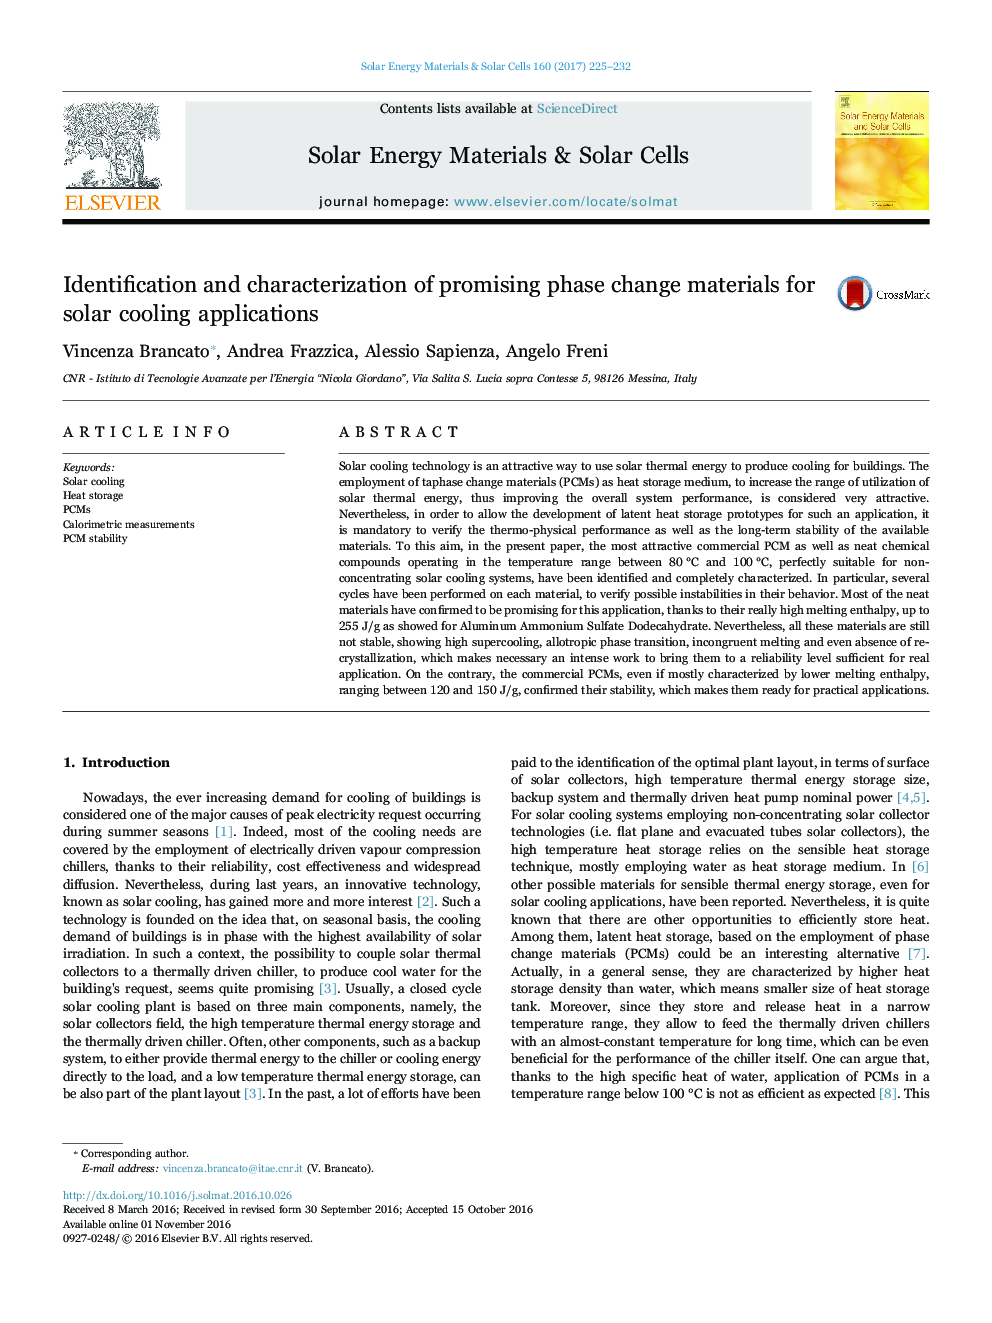 Identification and characterization of promising phase change materials for solar cooling applications